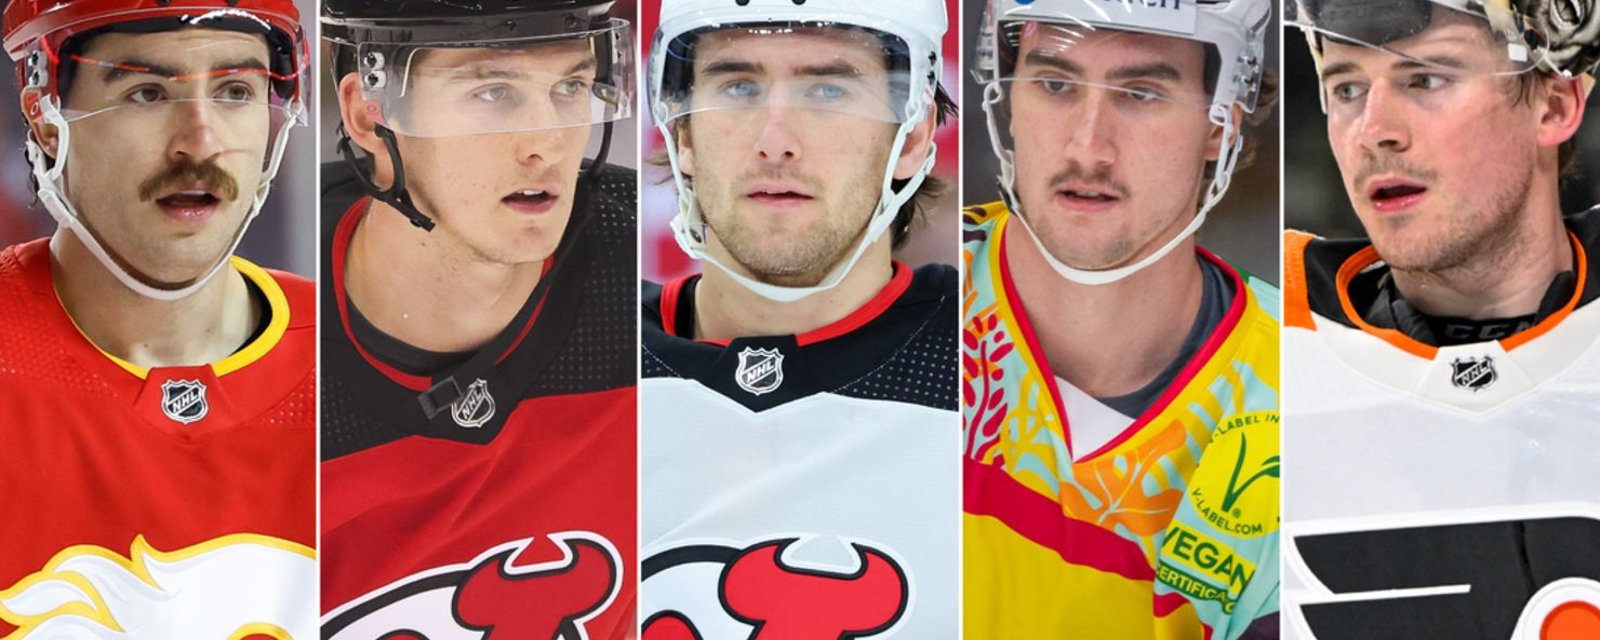 Major legal update in 2018 World Junior case impacts all 5 players involved! 